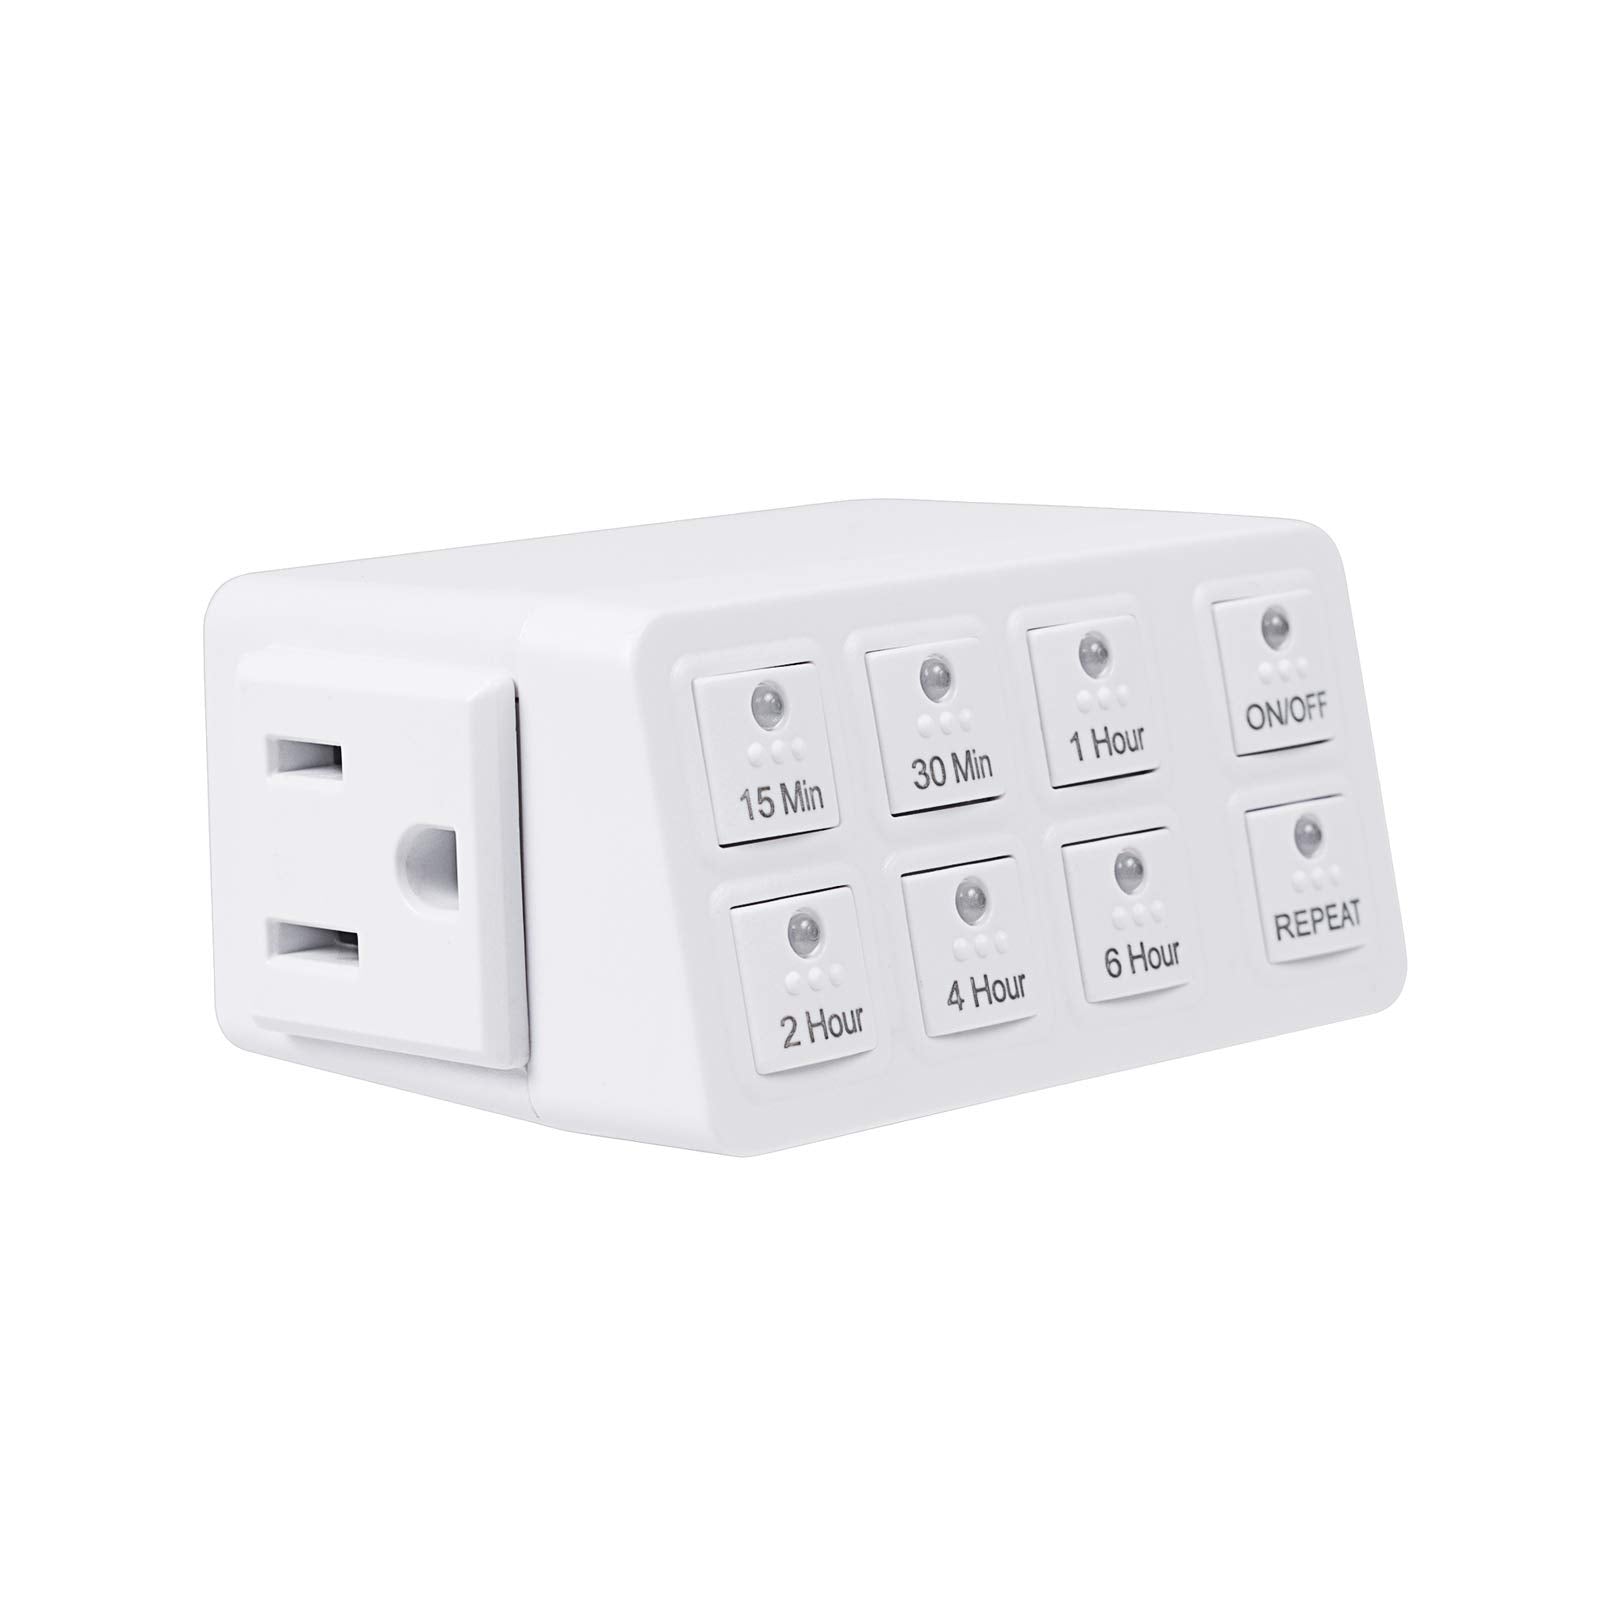 SIMPLE TOUCH Auto Shut-Off Safety Outlet, 30 min 15 min 10 min 5 min  Countdown Timer with HOLD option 